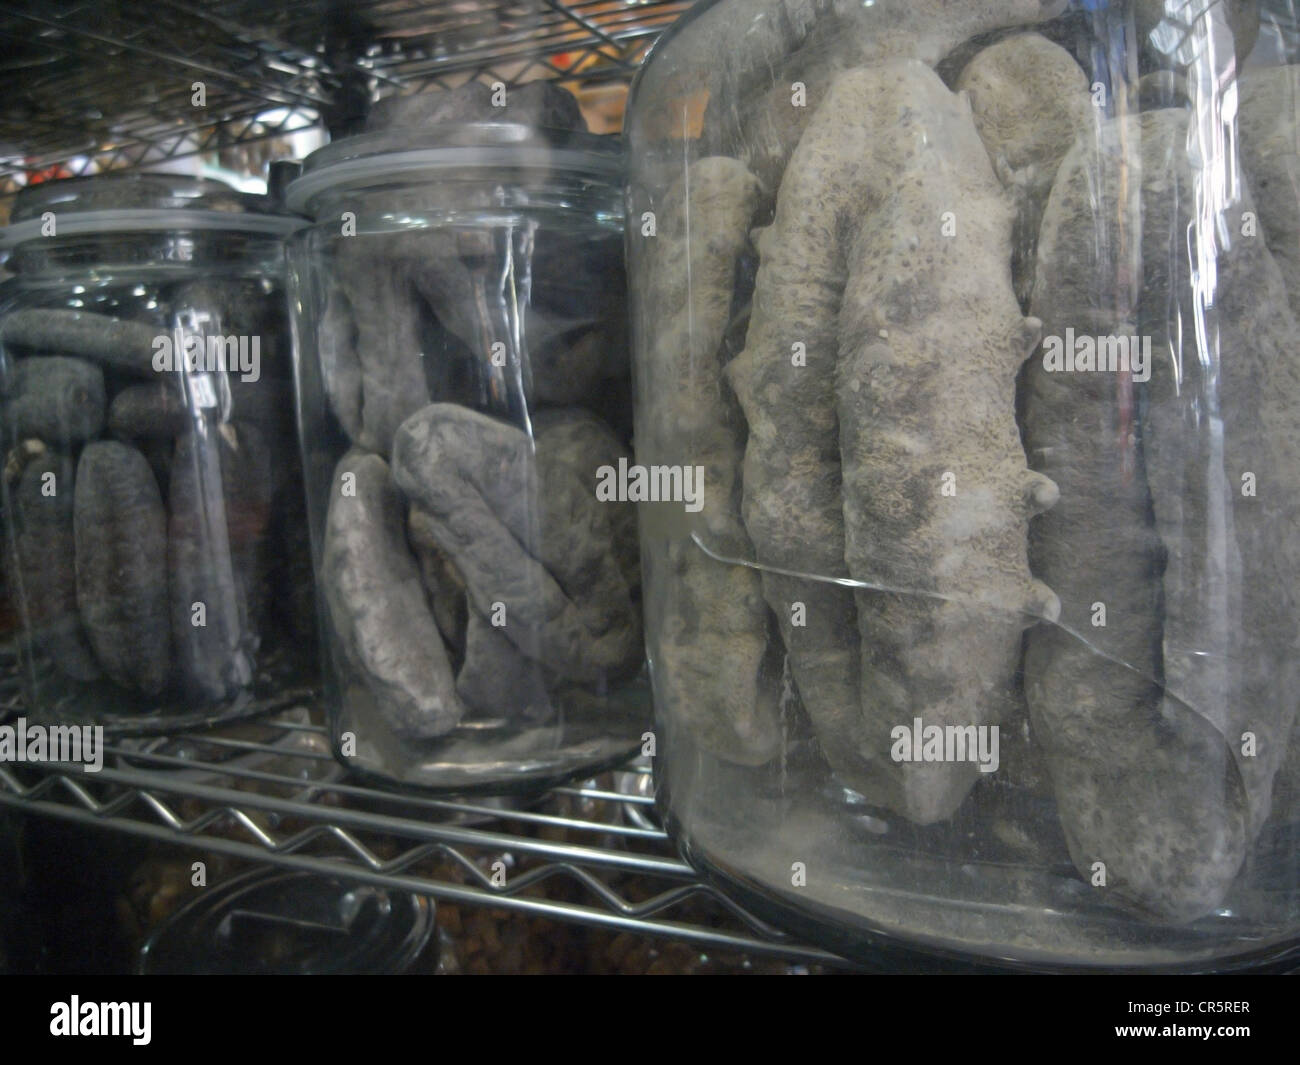 Dried beche-de-mer (sea cucumbers) for sale in chinese food shop in Sydney, Australia Stock Photo